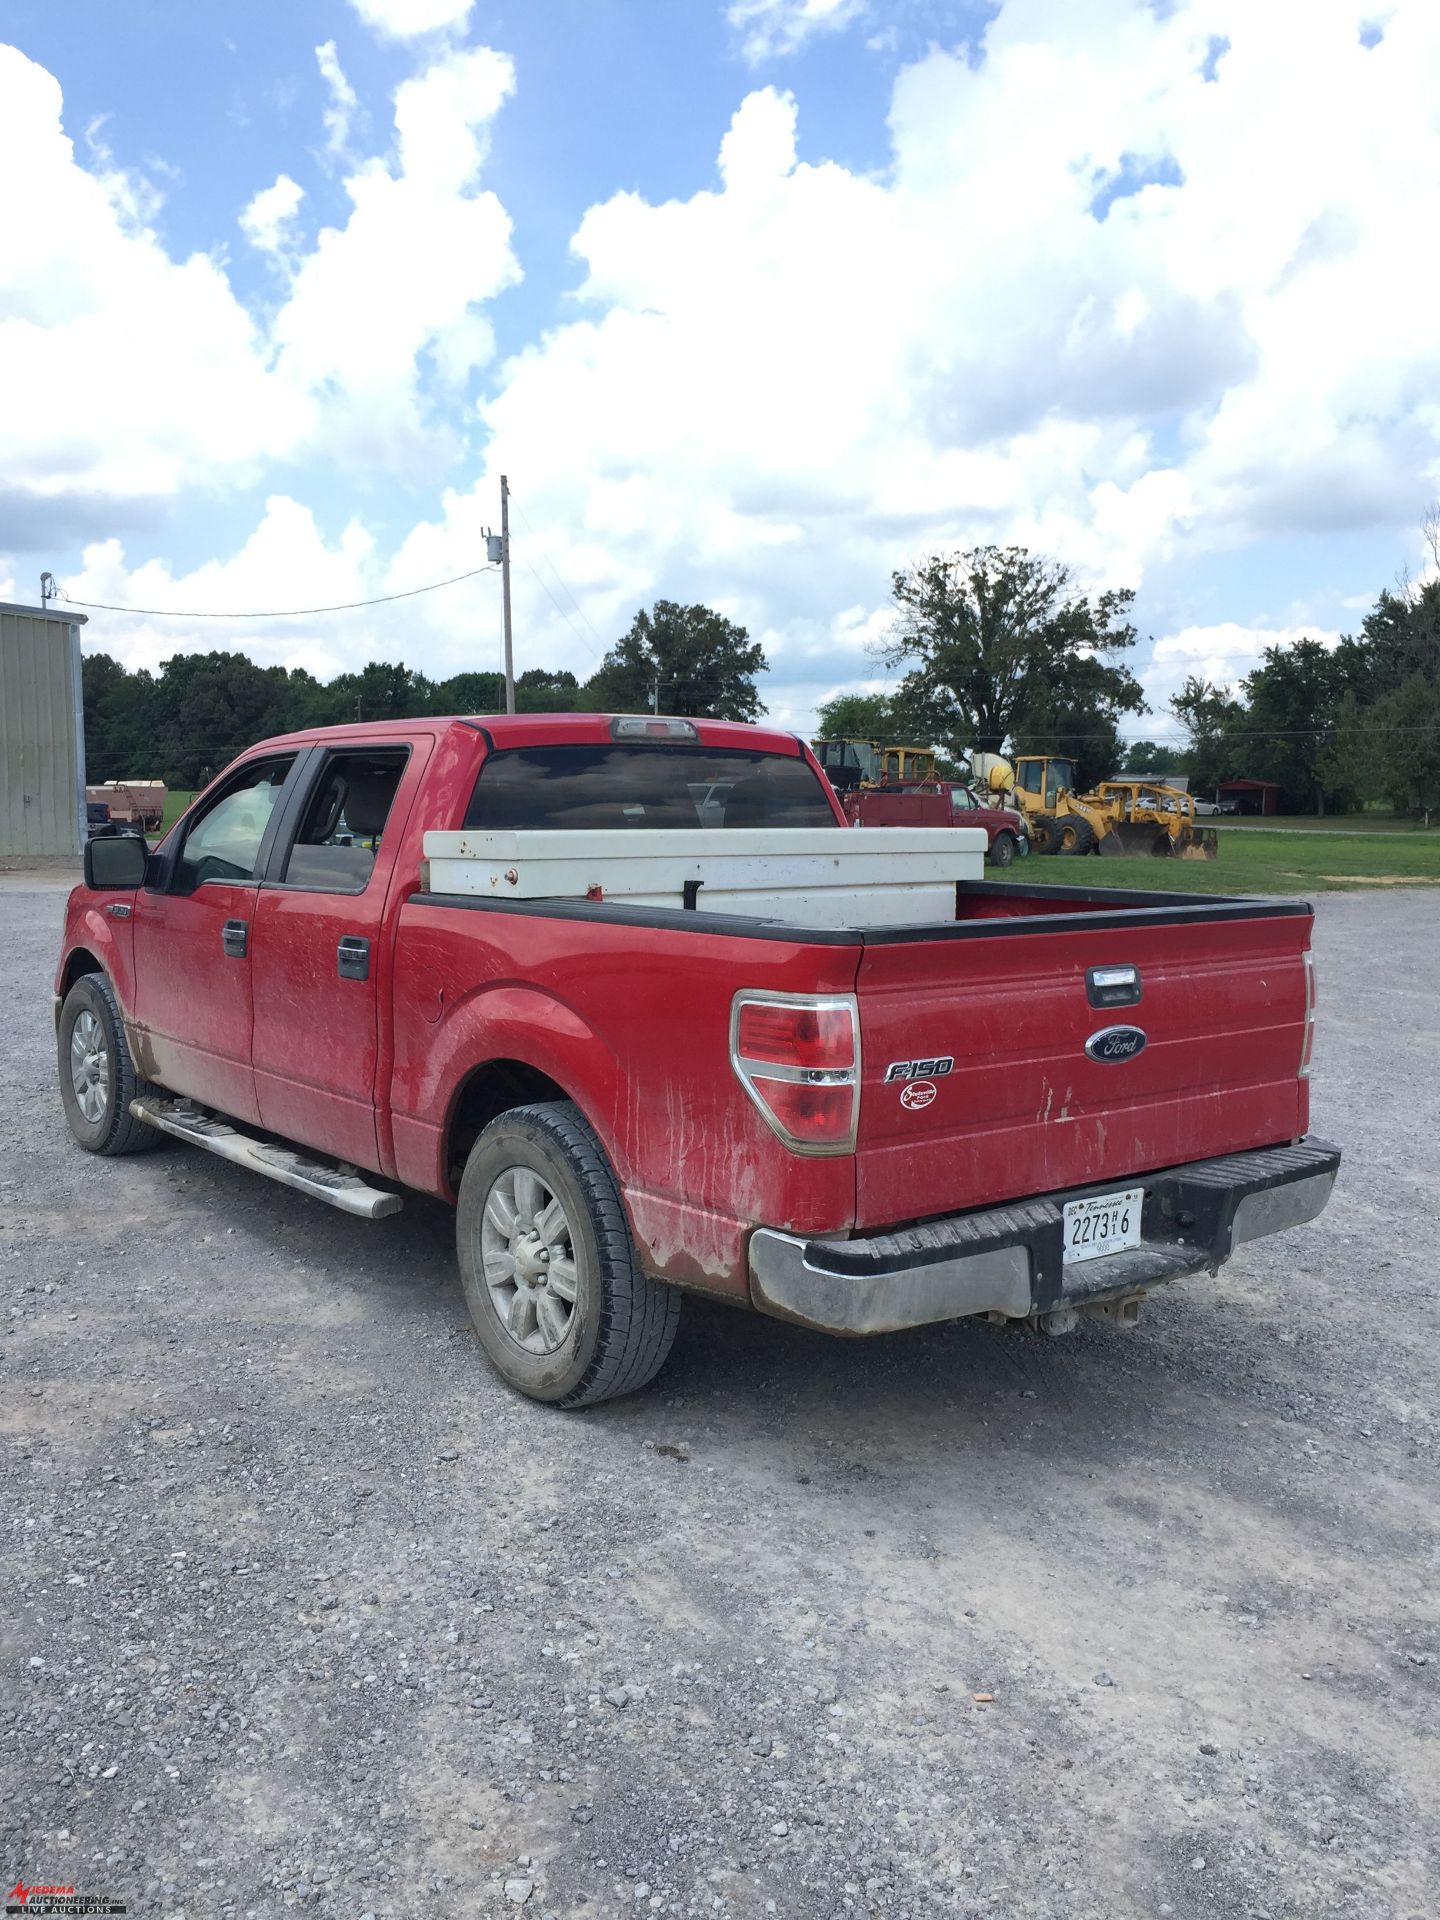 2010 FORD F150 CREW CAB PICKUP, SHORT BOX, 4 DOOR, 4.6L V8 GAS ENGINE, AUTOMATIC TRANS, AM/FM/CD, - Image 4 of 6